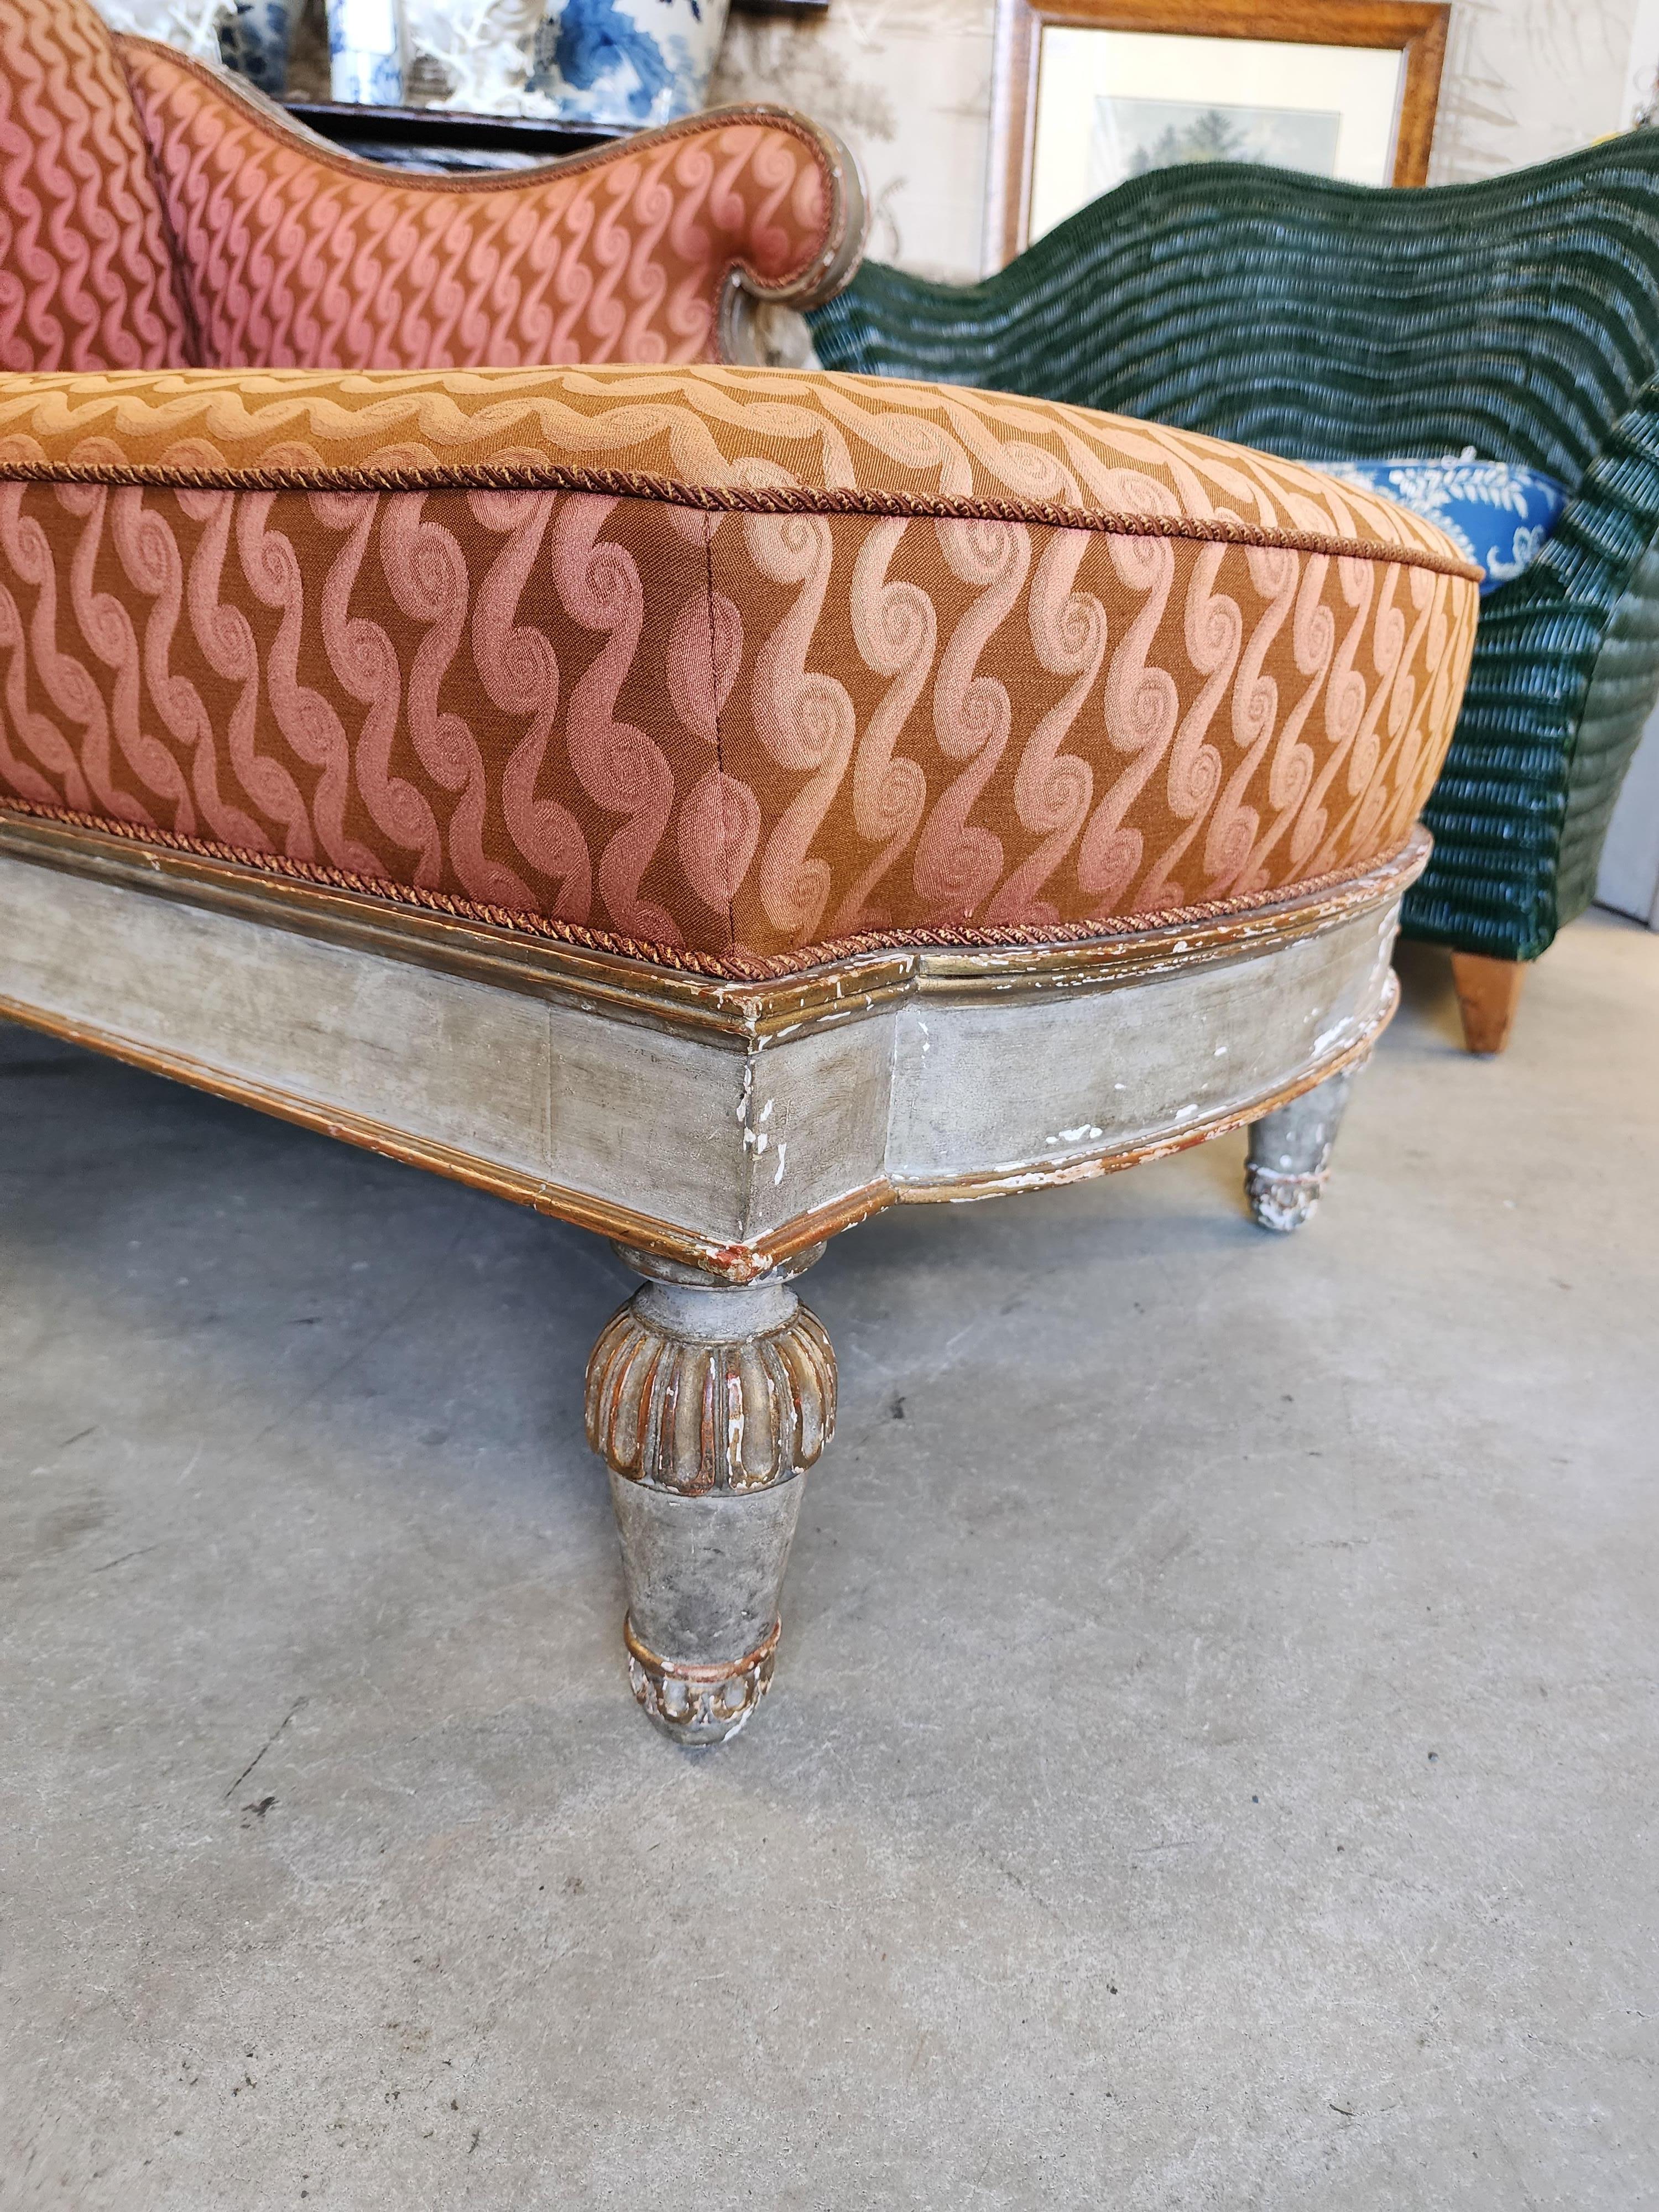 Diminutive reconnaier and the neoclassical style period produced in the 19th century this carved gilded and painted beauty has the most lovely proportions. 
The surface is carved and done quite well. This could add elegance and Beauty to any room.